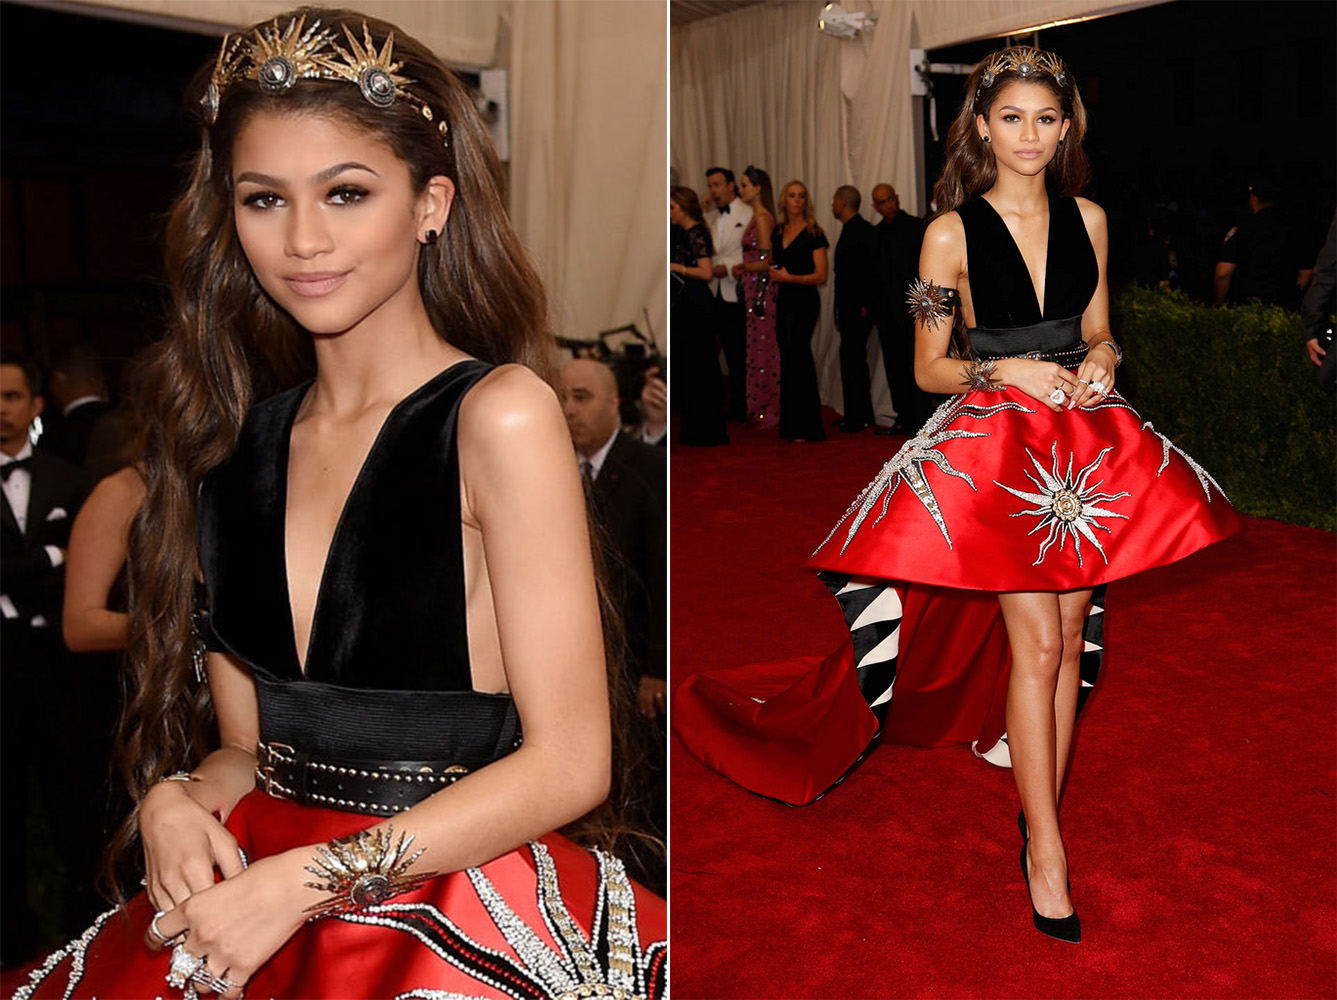 Our favourite beauty Looks at the Met Gala